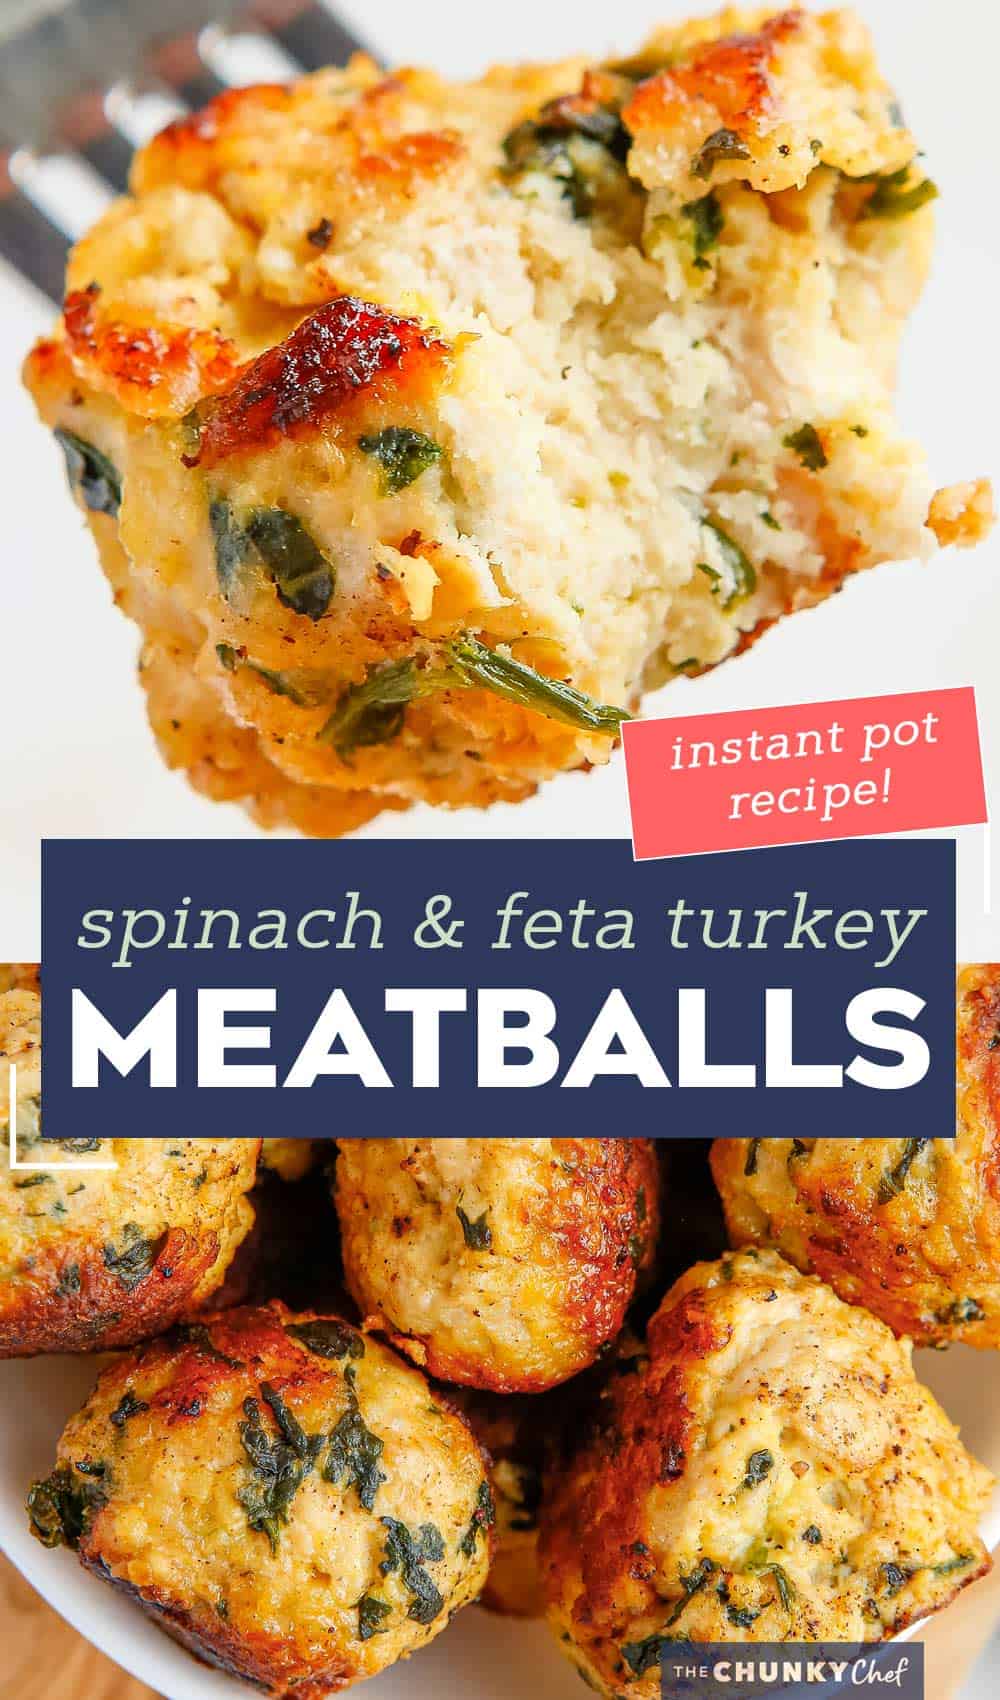 Spinach and Feta Turkey Meatballs - The Chunky Chef